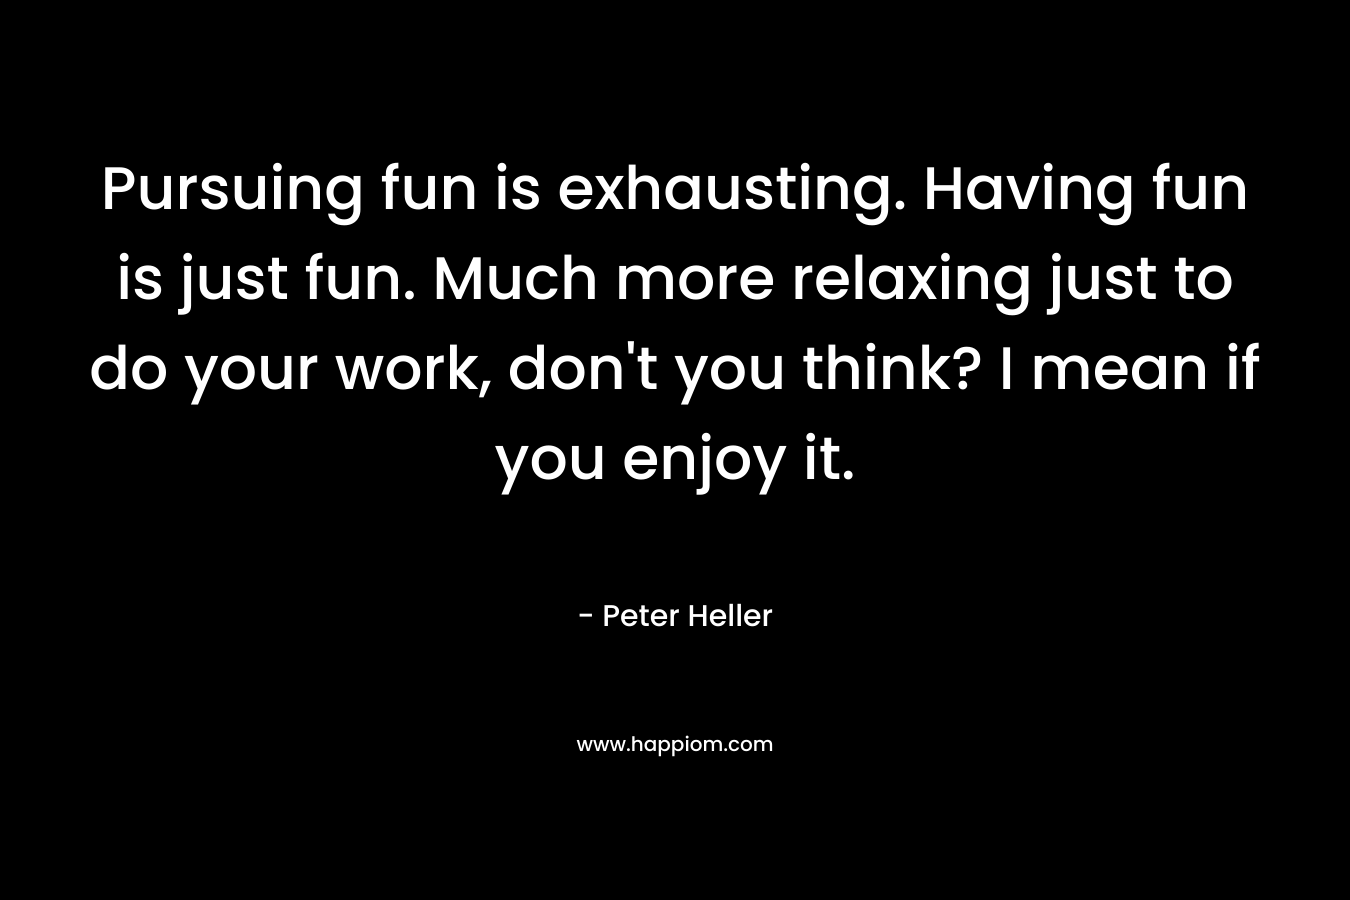 Pursuing fun is exhausting. Having fun is just fun. Much more relaxing just to do your work, don't you think? I mean if you enjoy it.